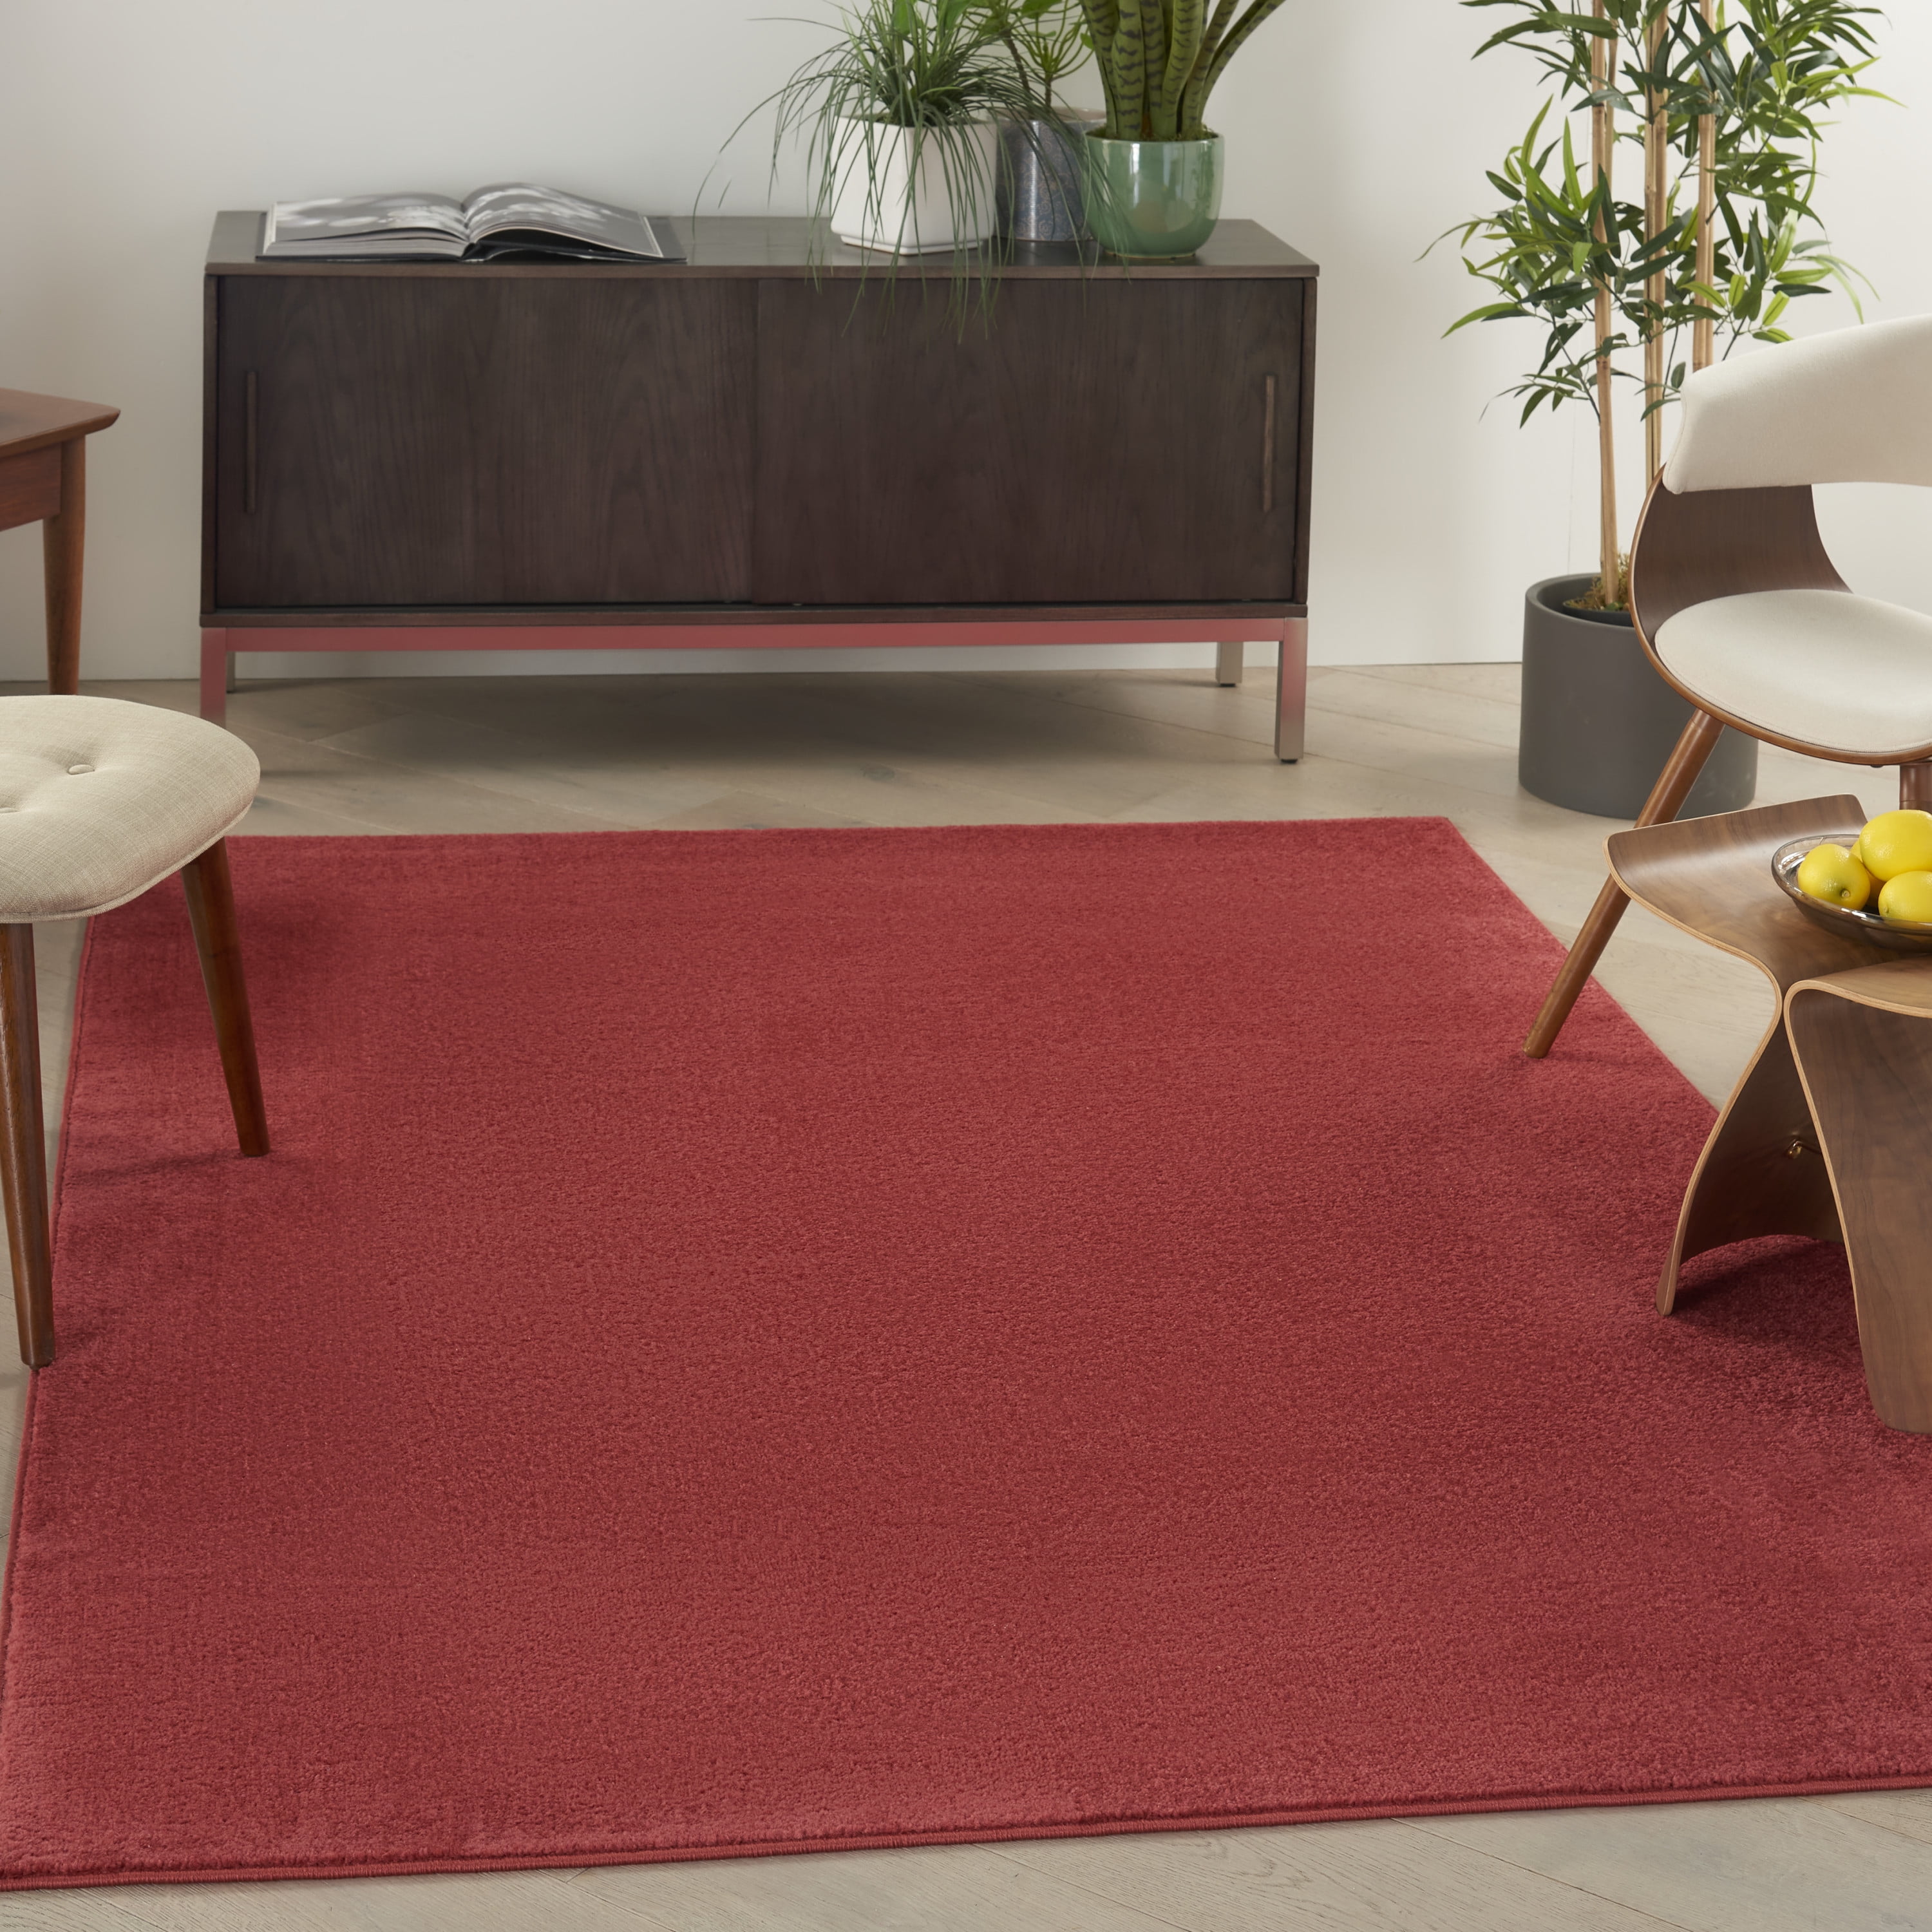 What are 6 x 9 Area rugs good for? – Direct Carpet